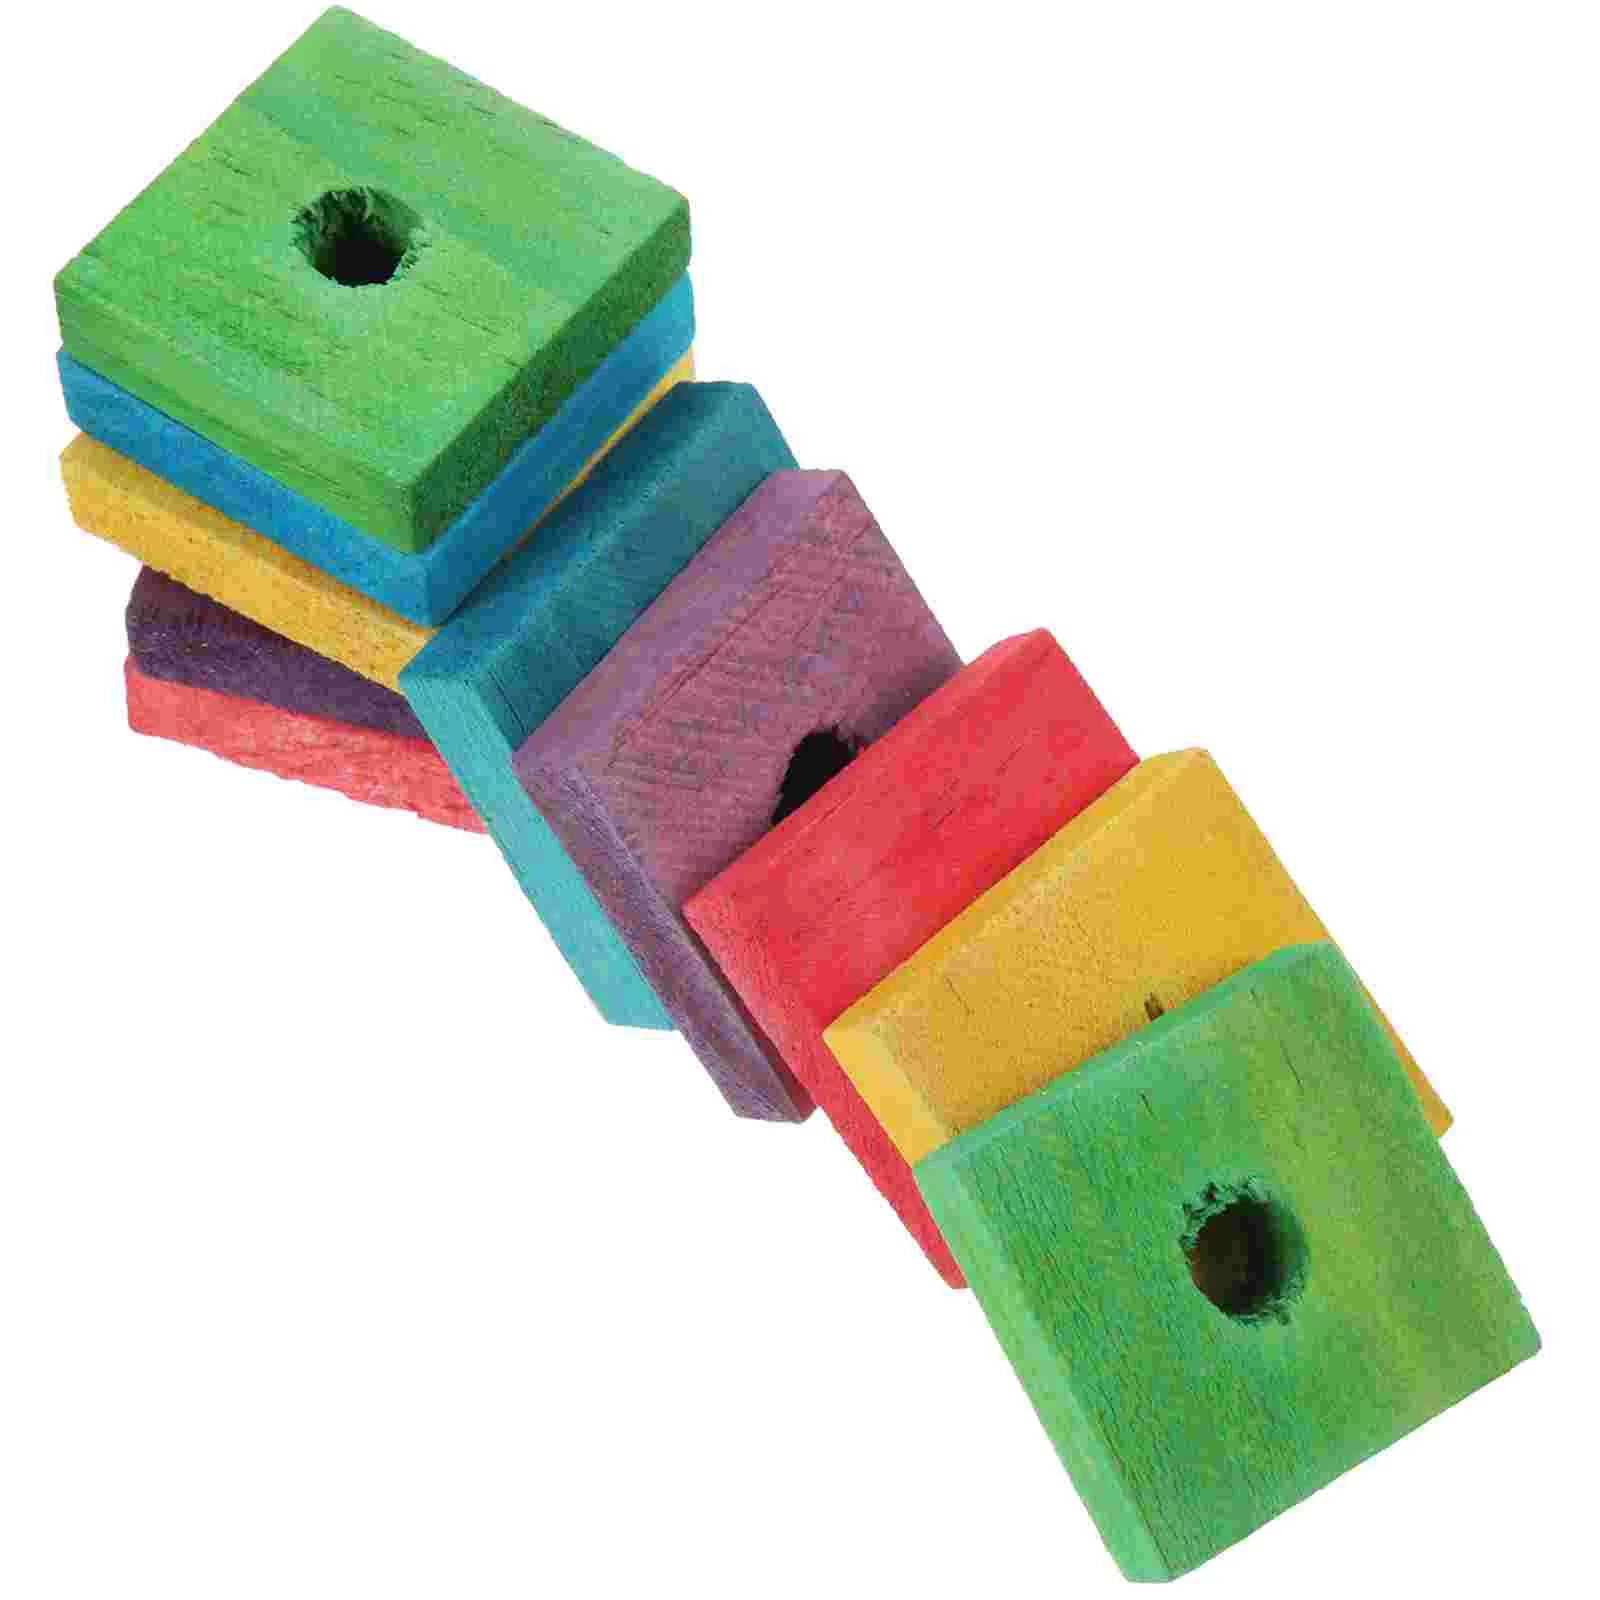 

Pet Bird Chewing Wood Clips Educational Cage Accessory DIY Craft Wood Clips Parrot Bite Toy Playing Toy Mixed Color